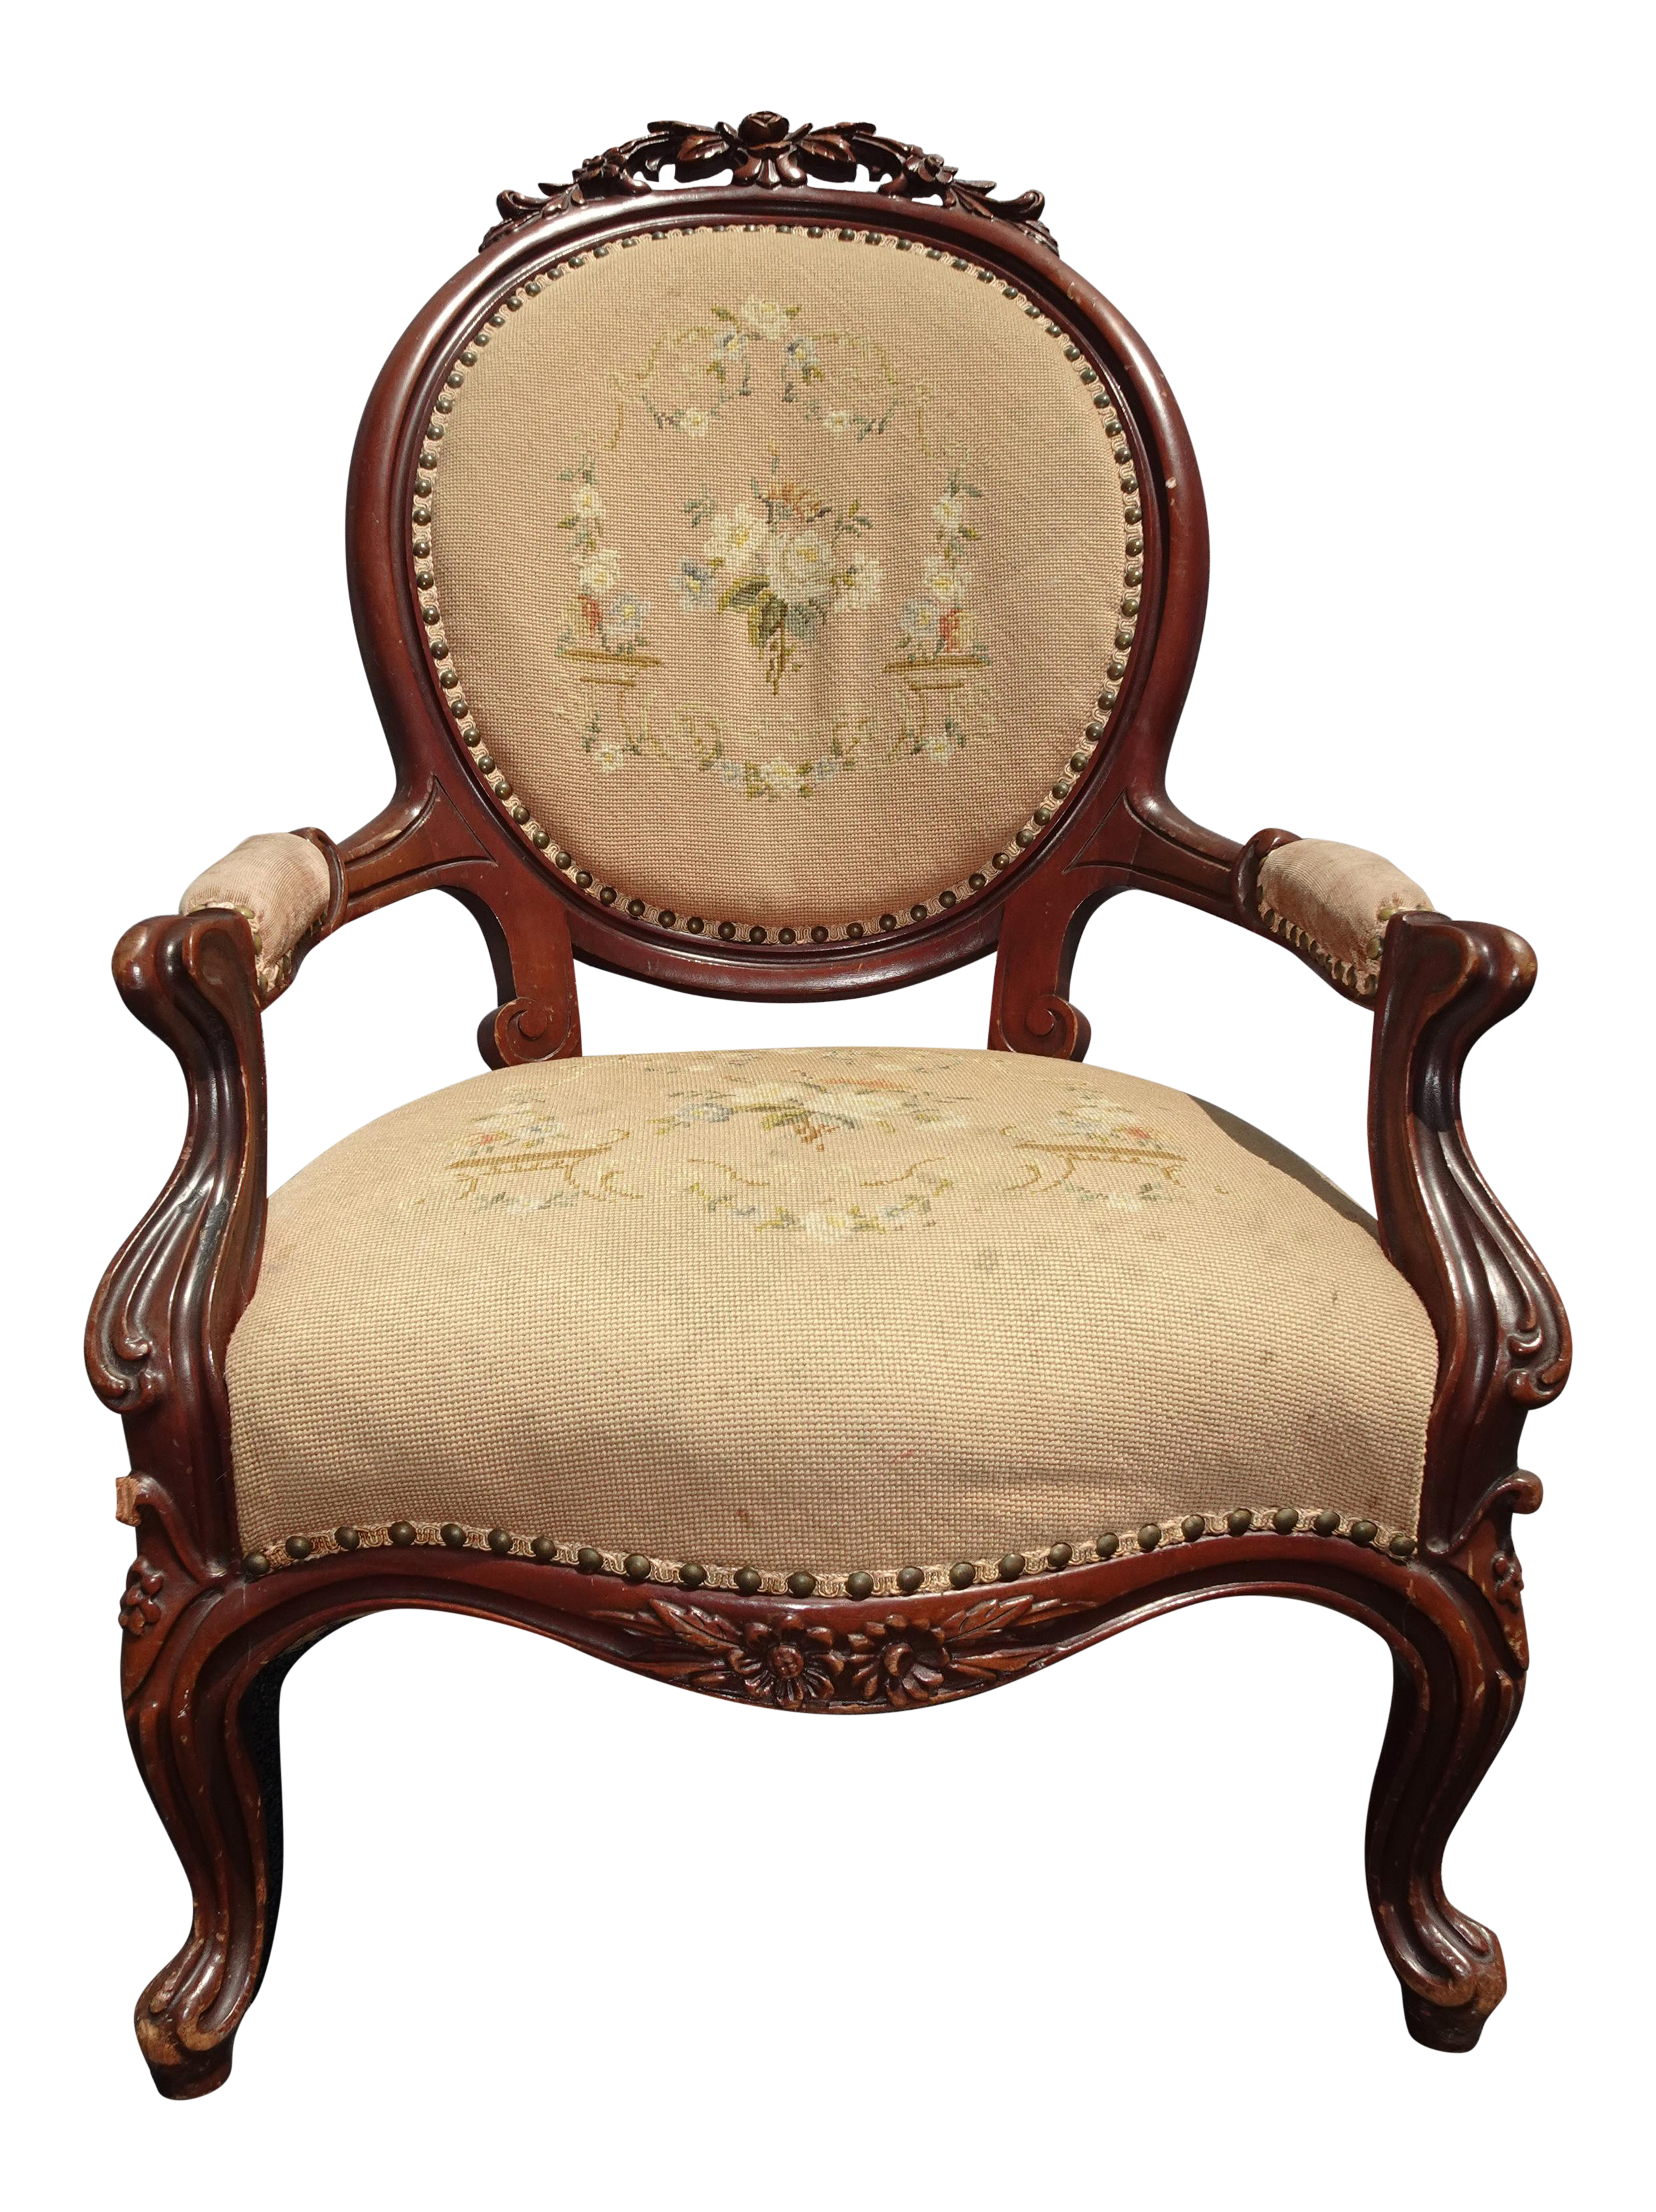 Elegant and Sophisticated Victorian Chairs: A Timeless Addition to Your Home